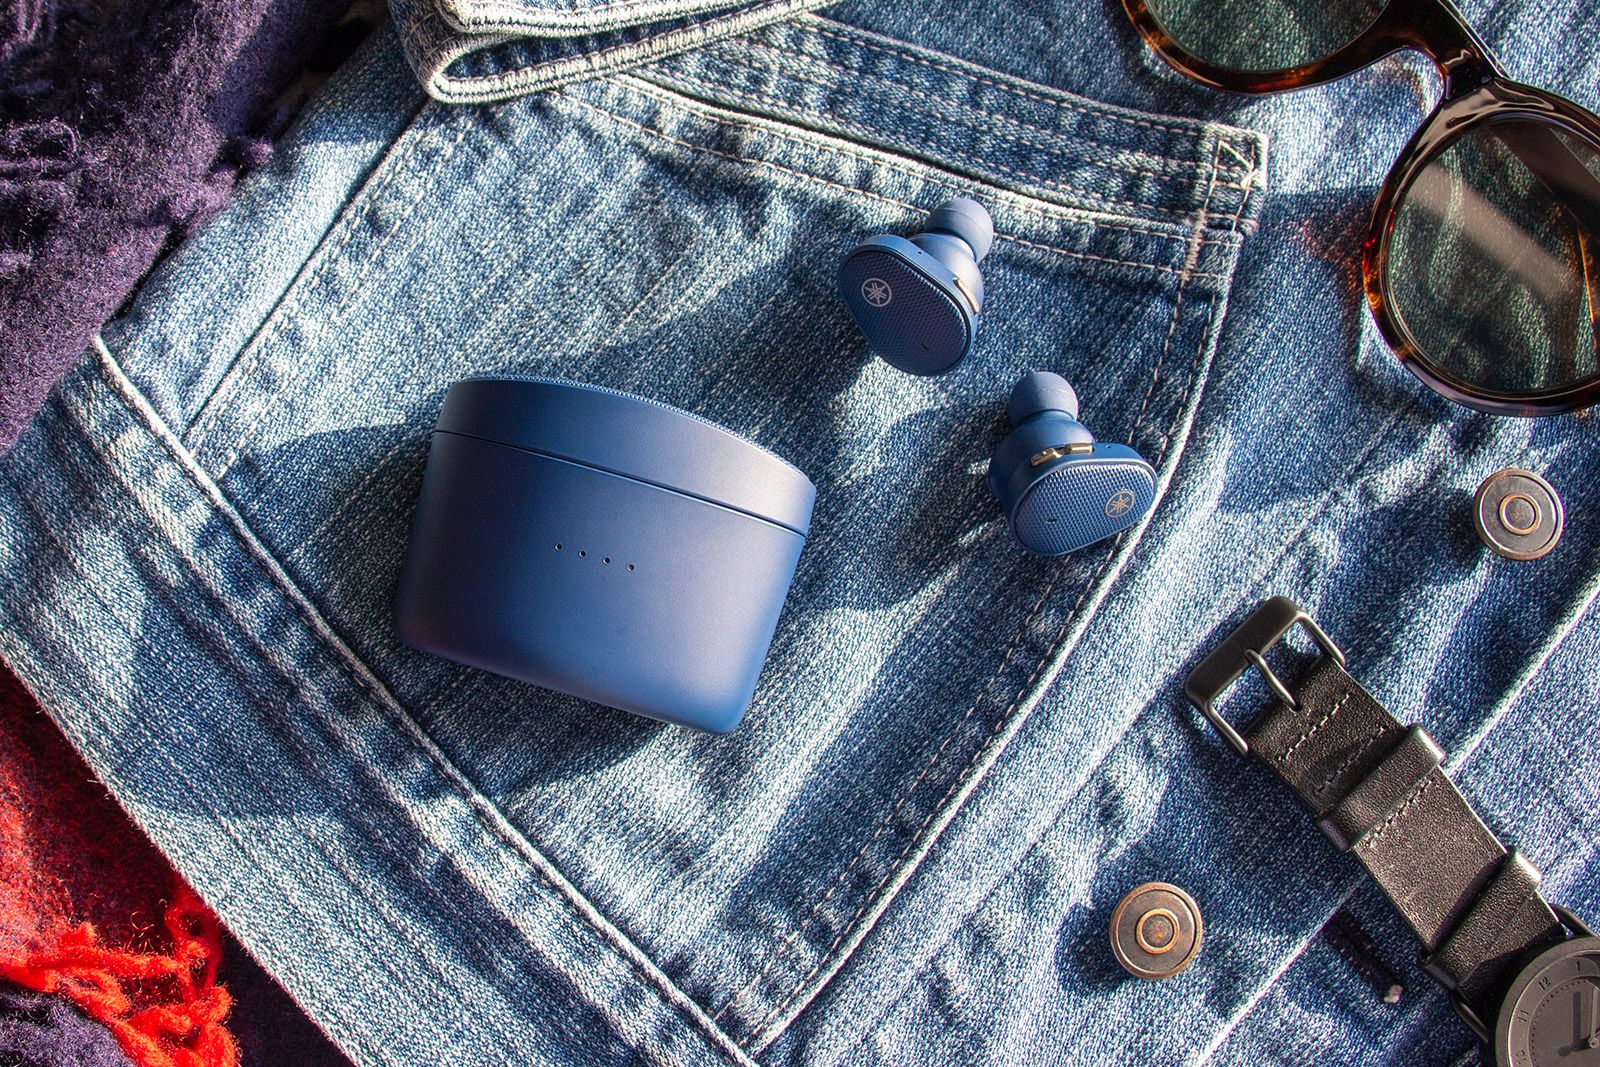 Yamaha TW-E5B true wireless earbuds are designed to perform at low volumes photo 1